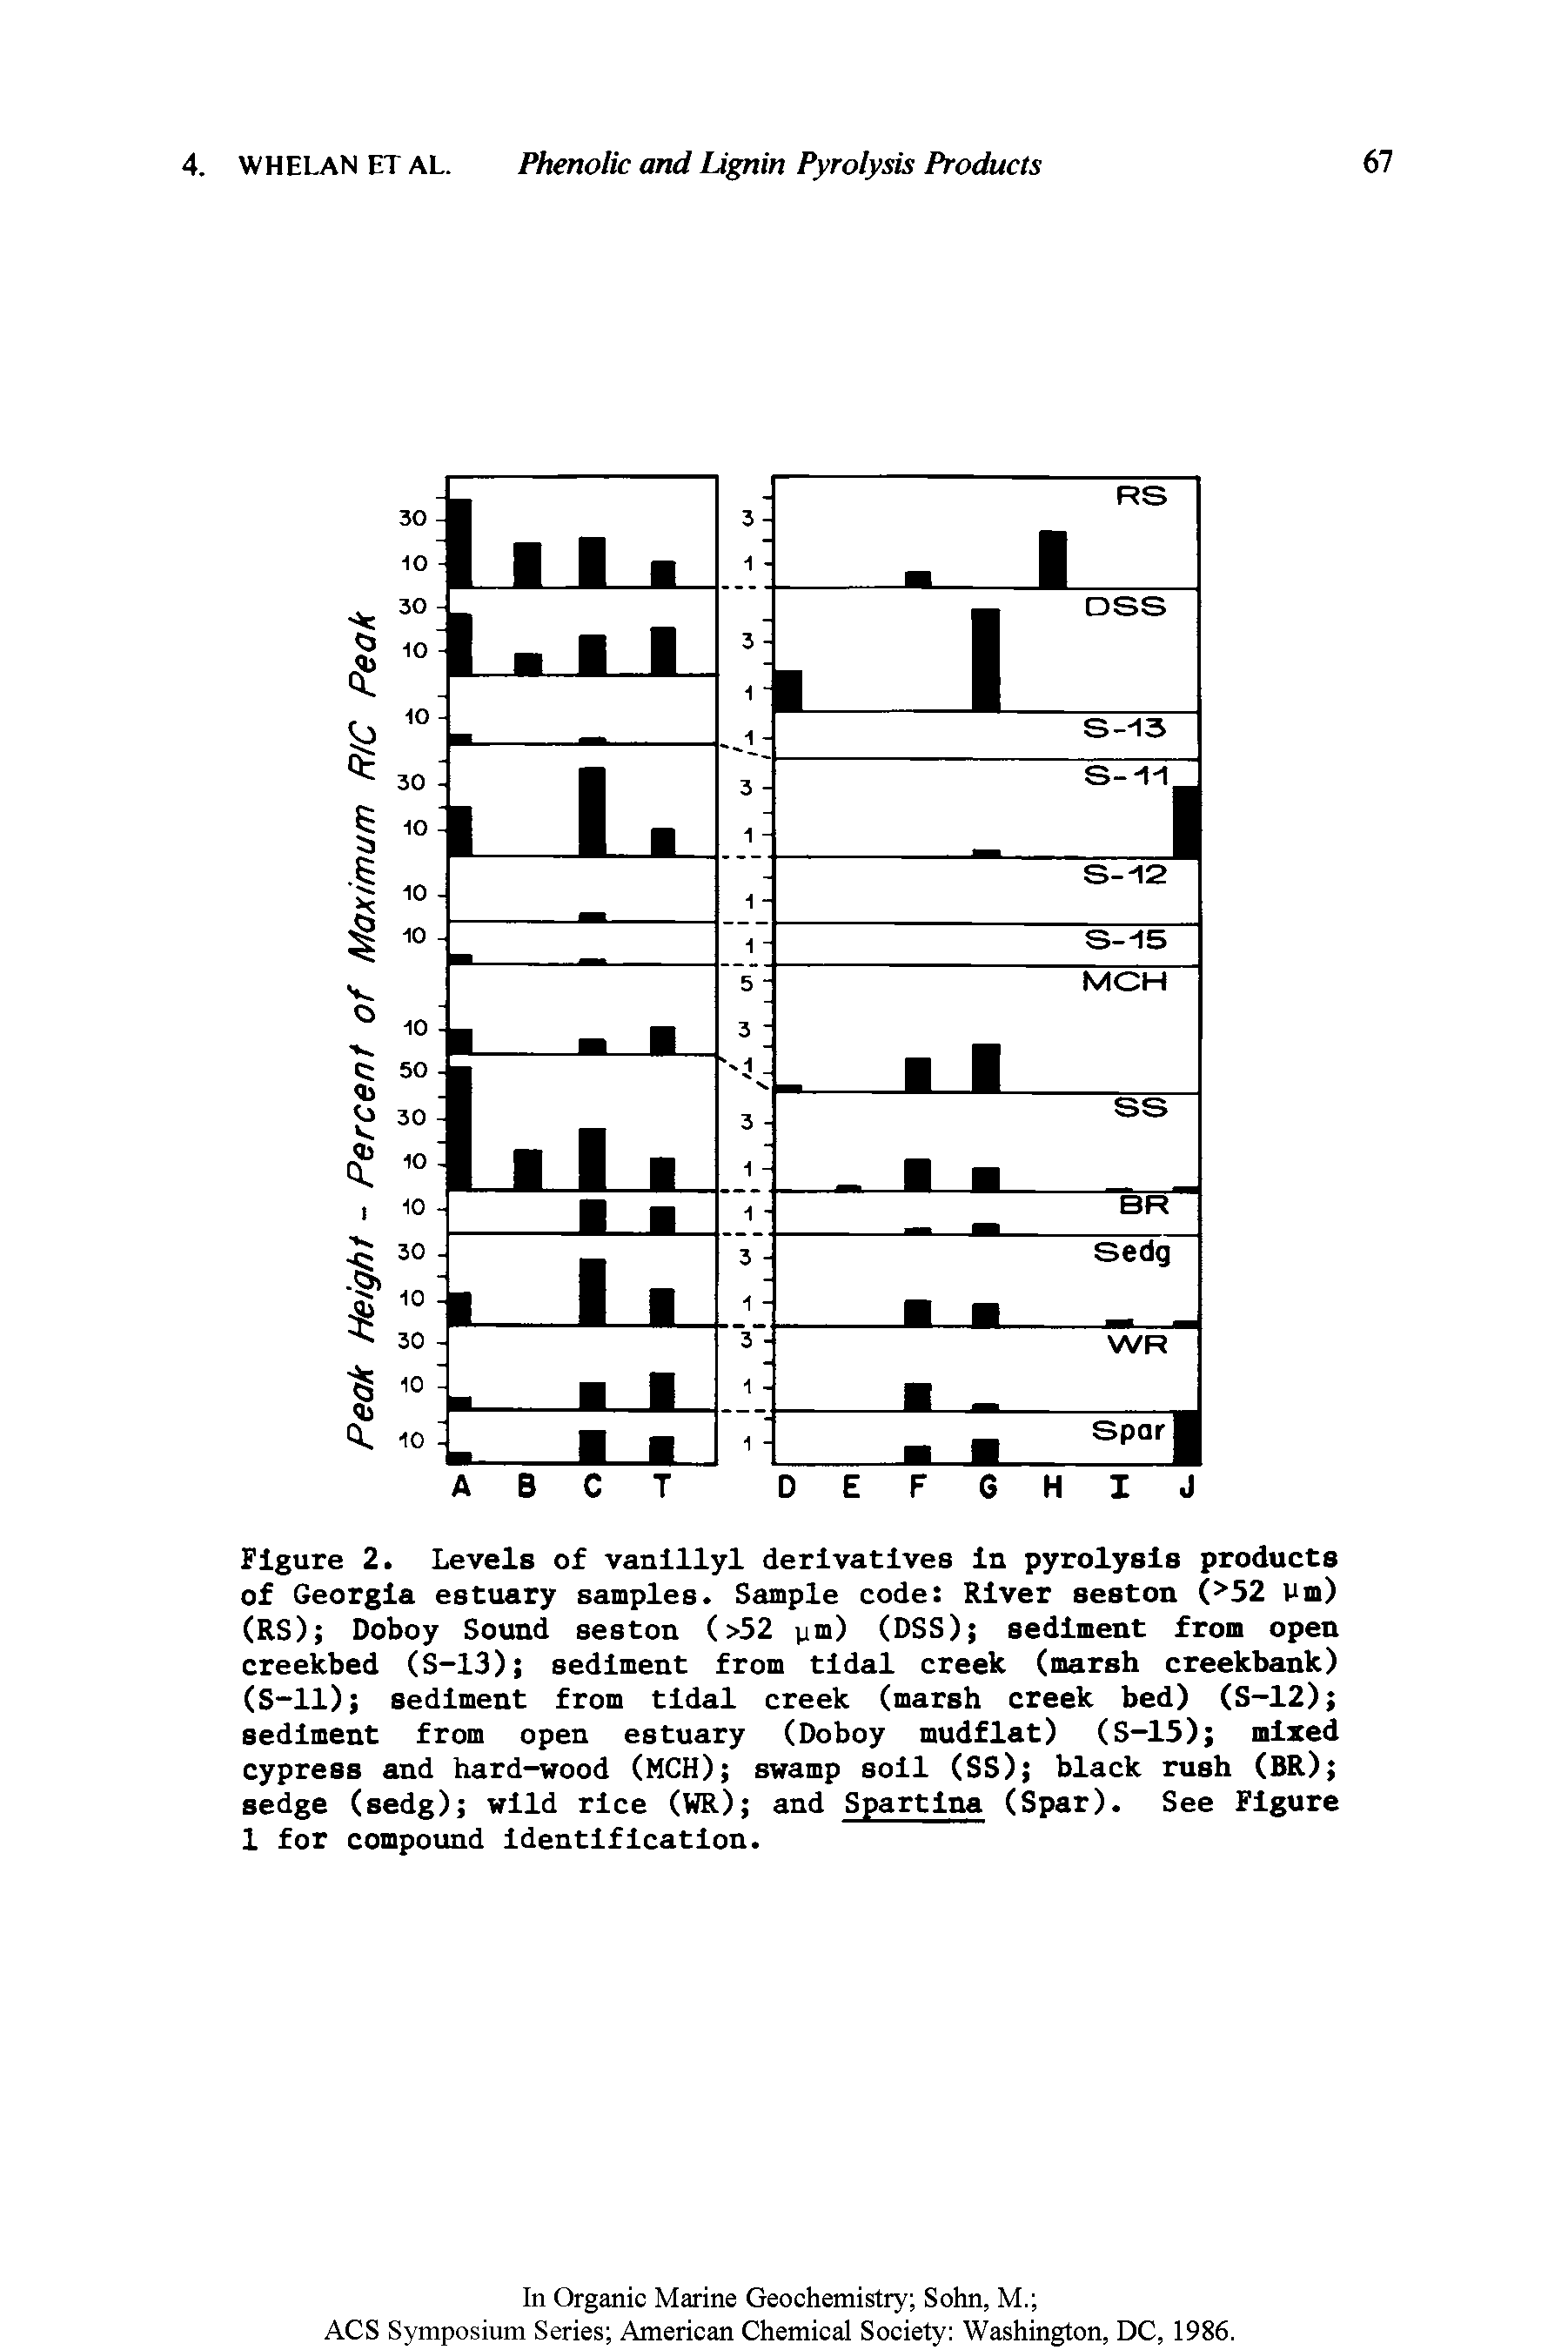 Figure 2. Levels of vanlllyl derivatives In pyrolysis products of Georgia estuary samples. Sample code River seston (>52 Pm) (RS) Doboy Sound seston (>52 ym) (DSS) sediment from open creekbed (S-13) sediment from tidal creek (marsh creekbank) (S-11) sediment from tidal creek (marsh creek bed) (S-12) sediment from open estuary (Doboy mudflat) (S-15) mixed cypress and hard-wood (MCH) swamp soil (SS) black rush (BR) sedge (sedg) wild rice (WR) and Spartlna (Spar). See Figure 1 for compound Identification.